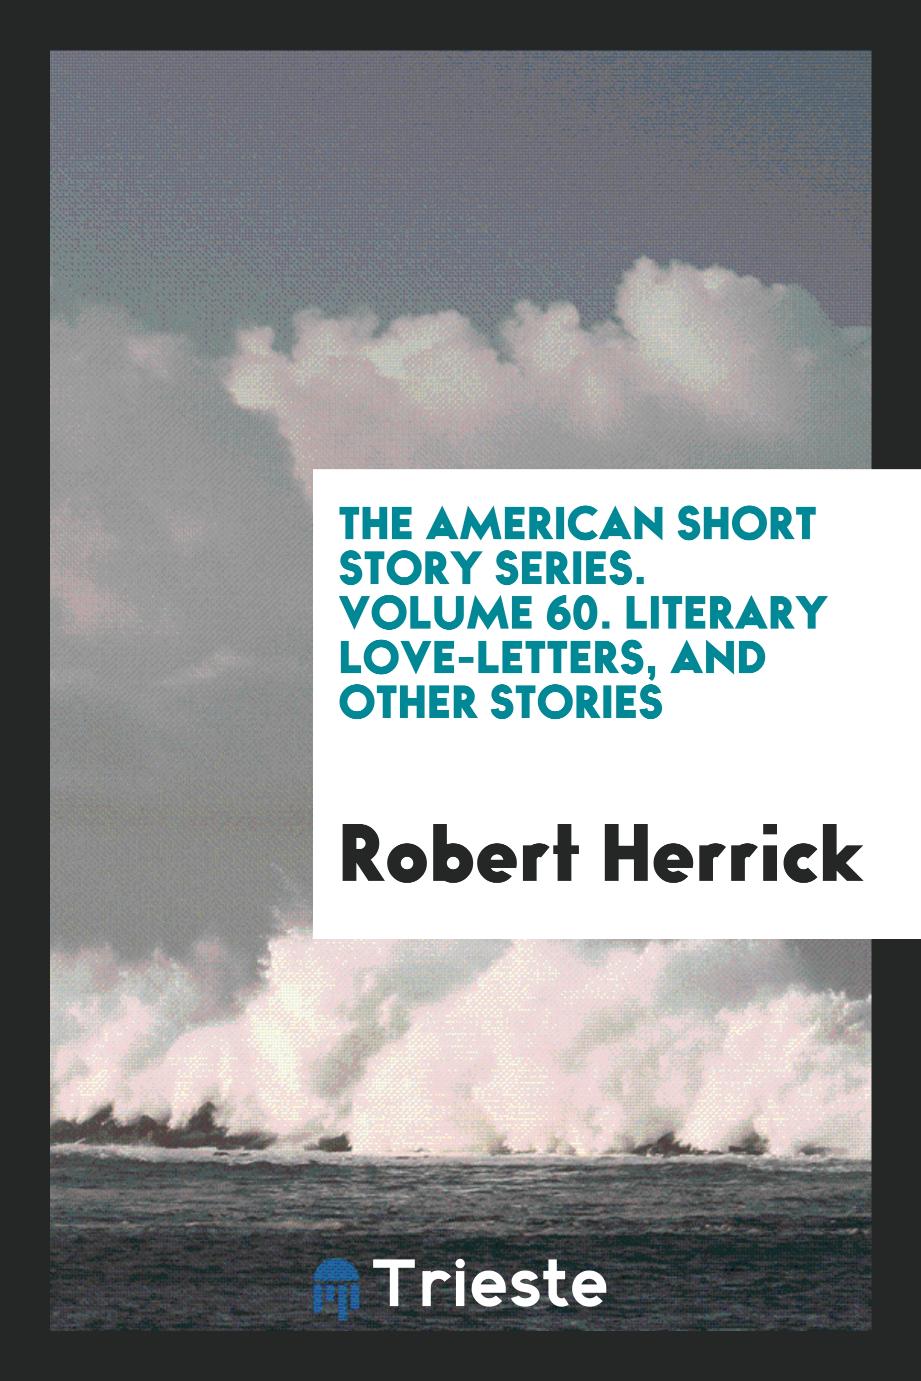 The American Short Story Series. Volume 60. Literary Love-letters, and Other Stories